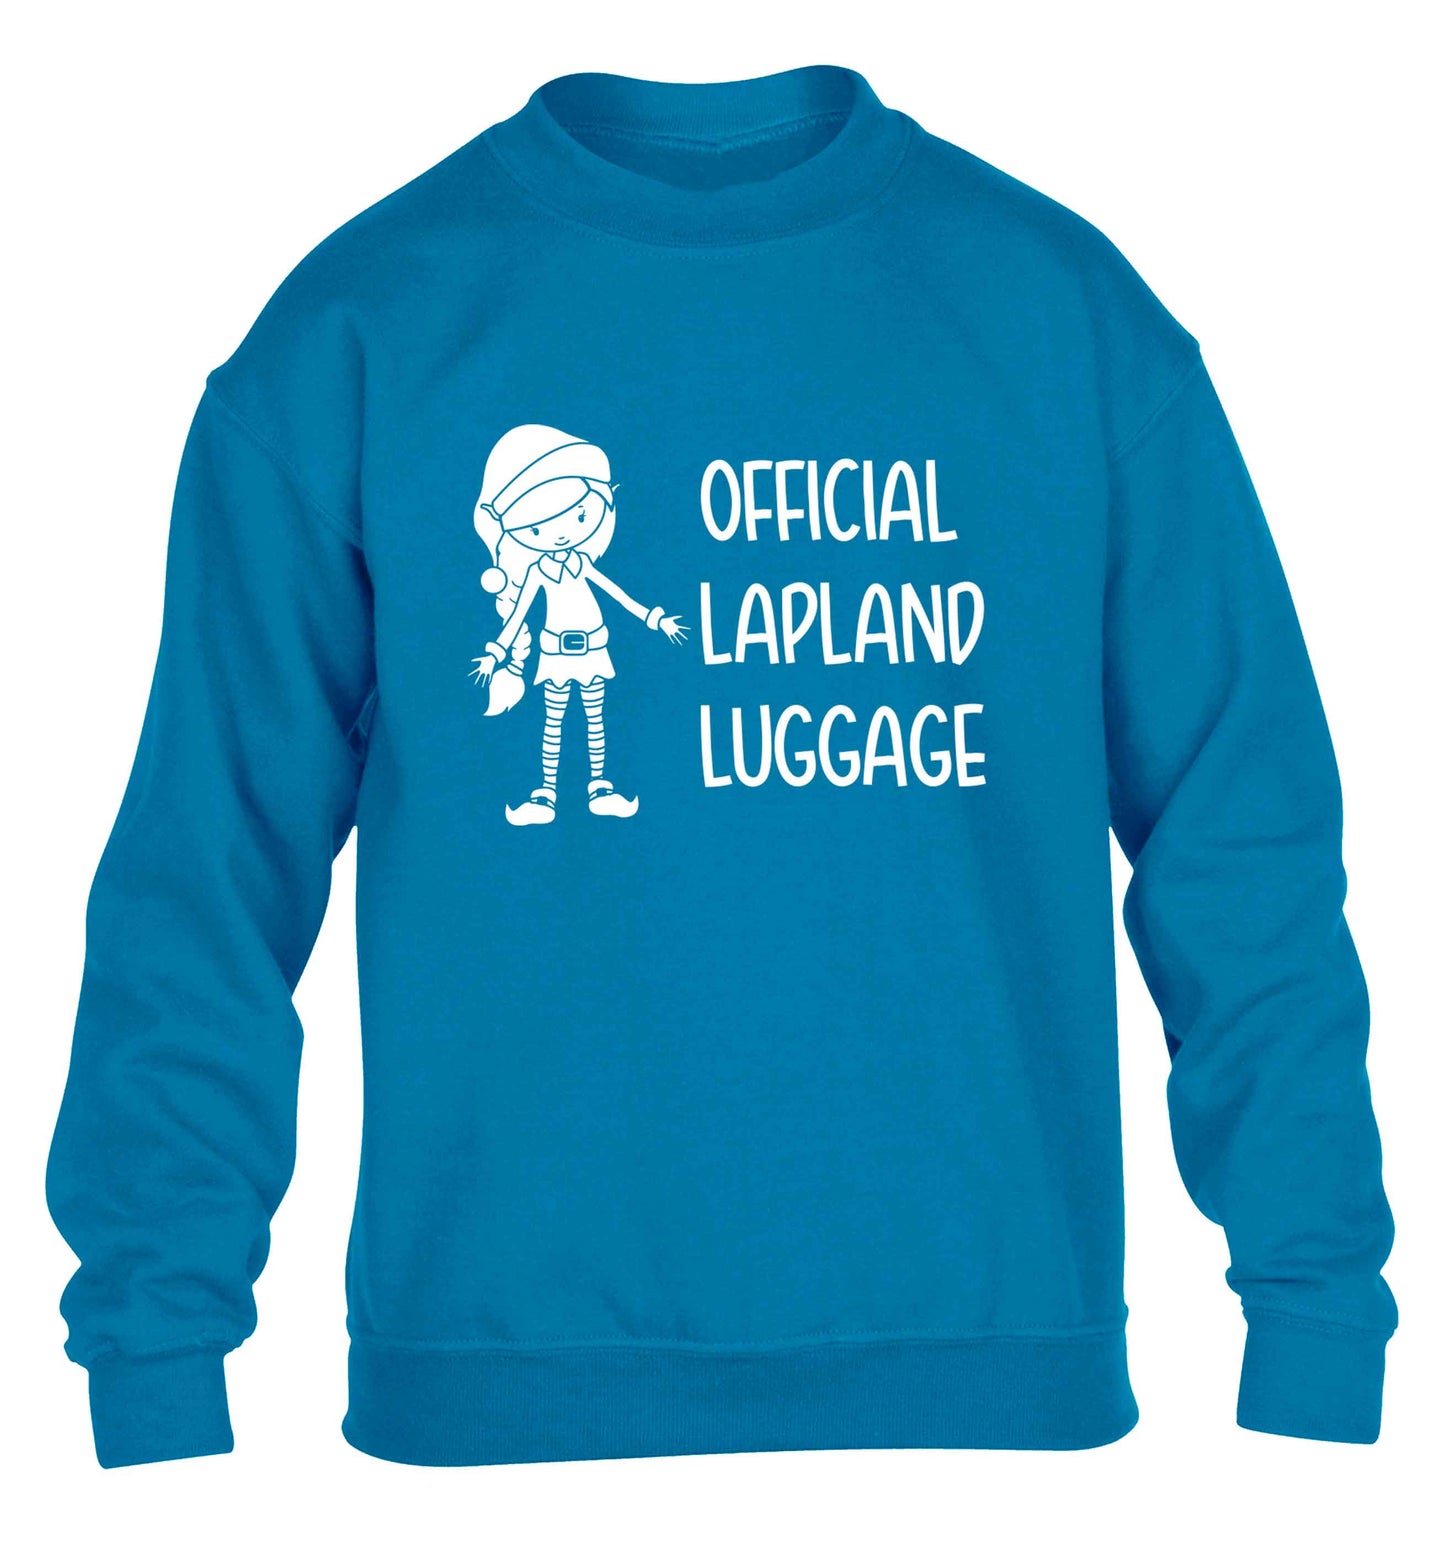 Official lapland luggage - Elf snowflake children's blue sweater 12-13 Years